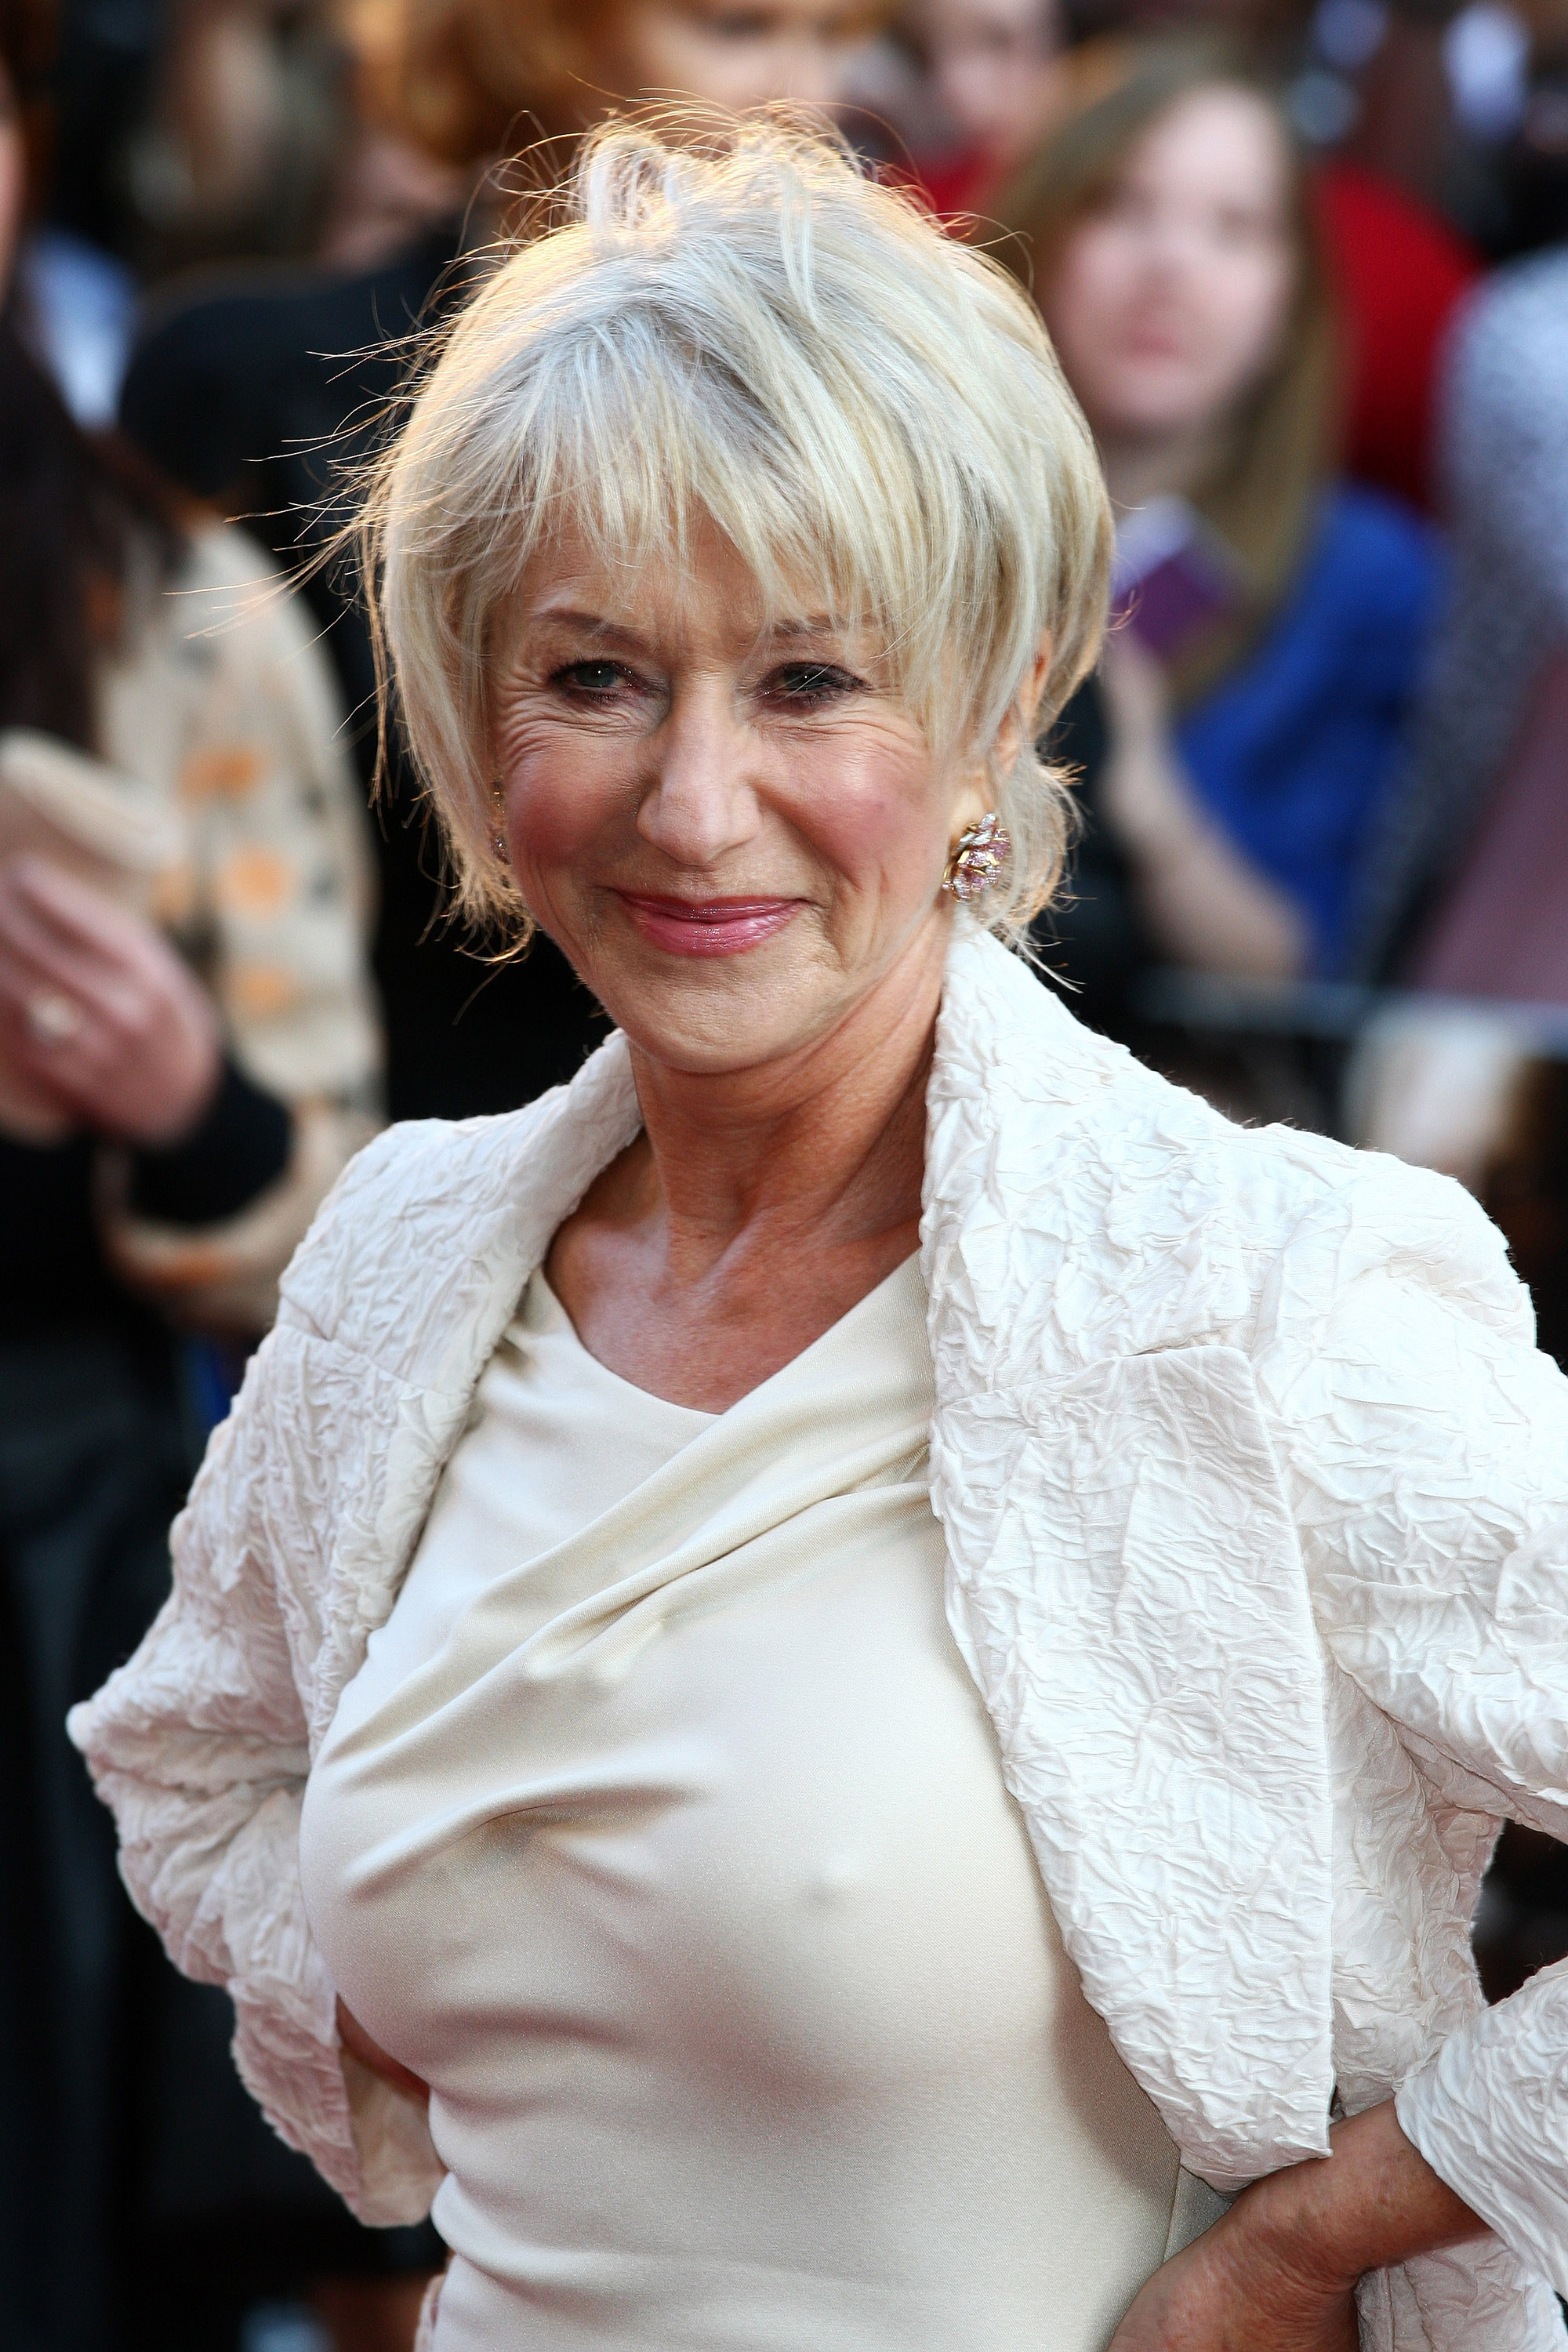 Helen sexy mirren of pictures The Notorious